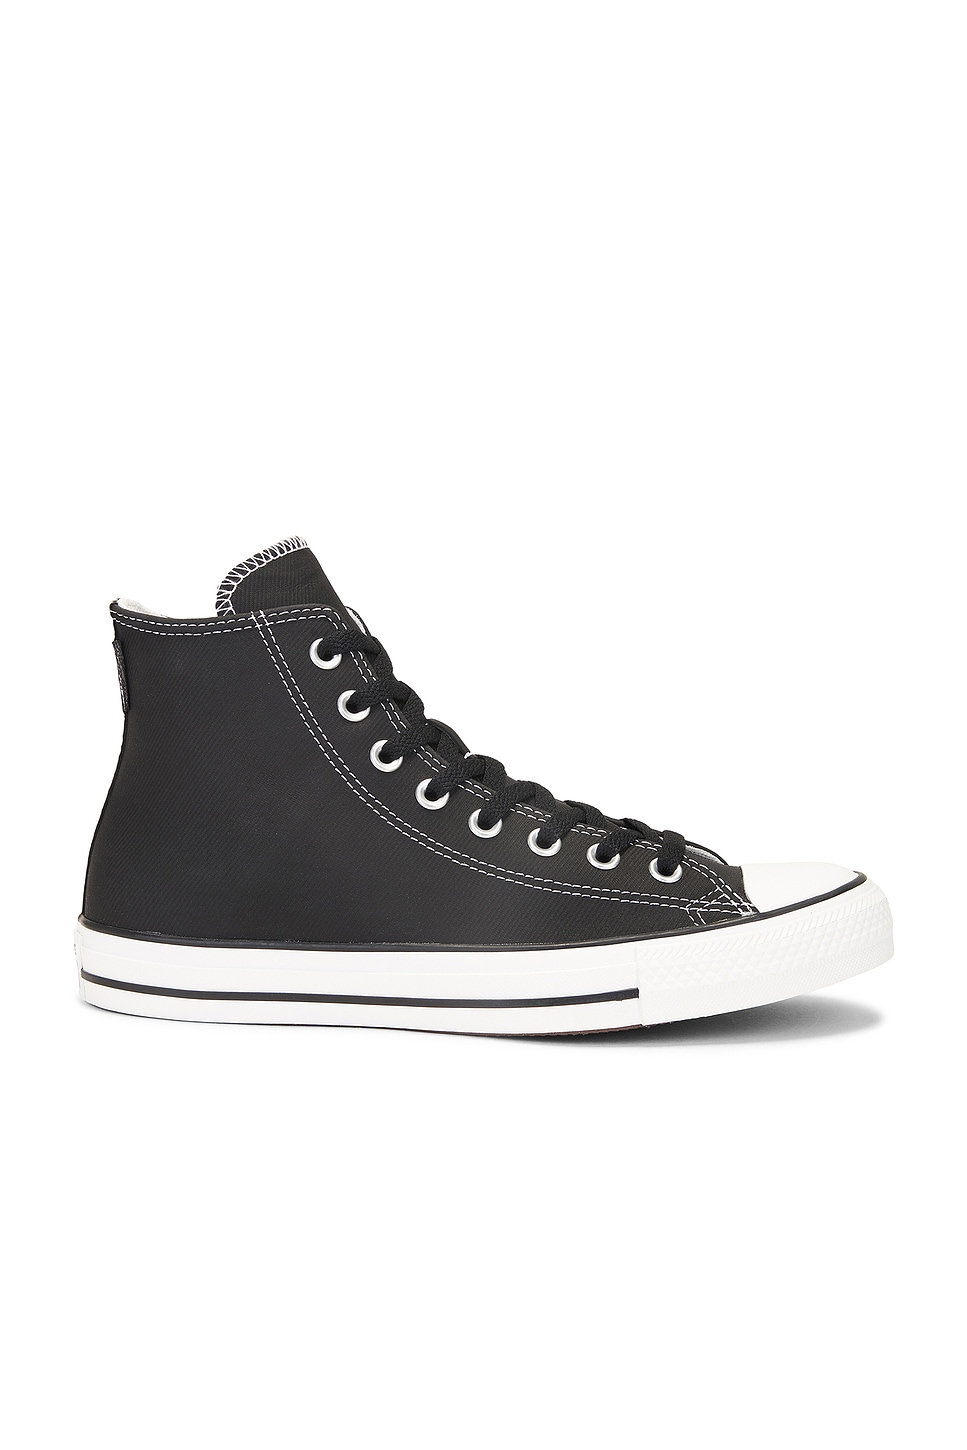 Image 1 of Converse Chuck Taylor All Star Twill in Black, Cloudy Daze, & White